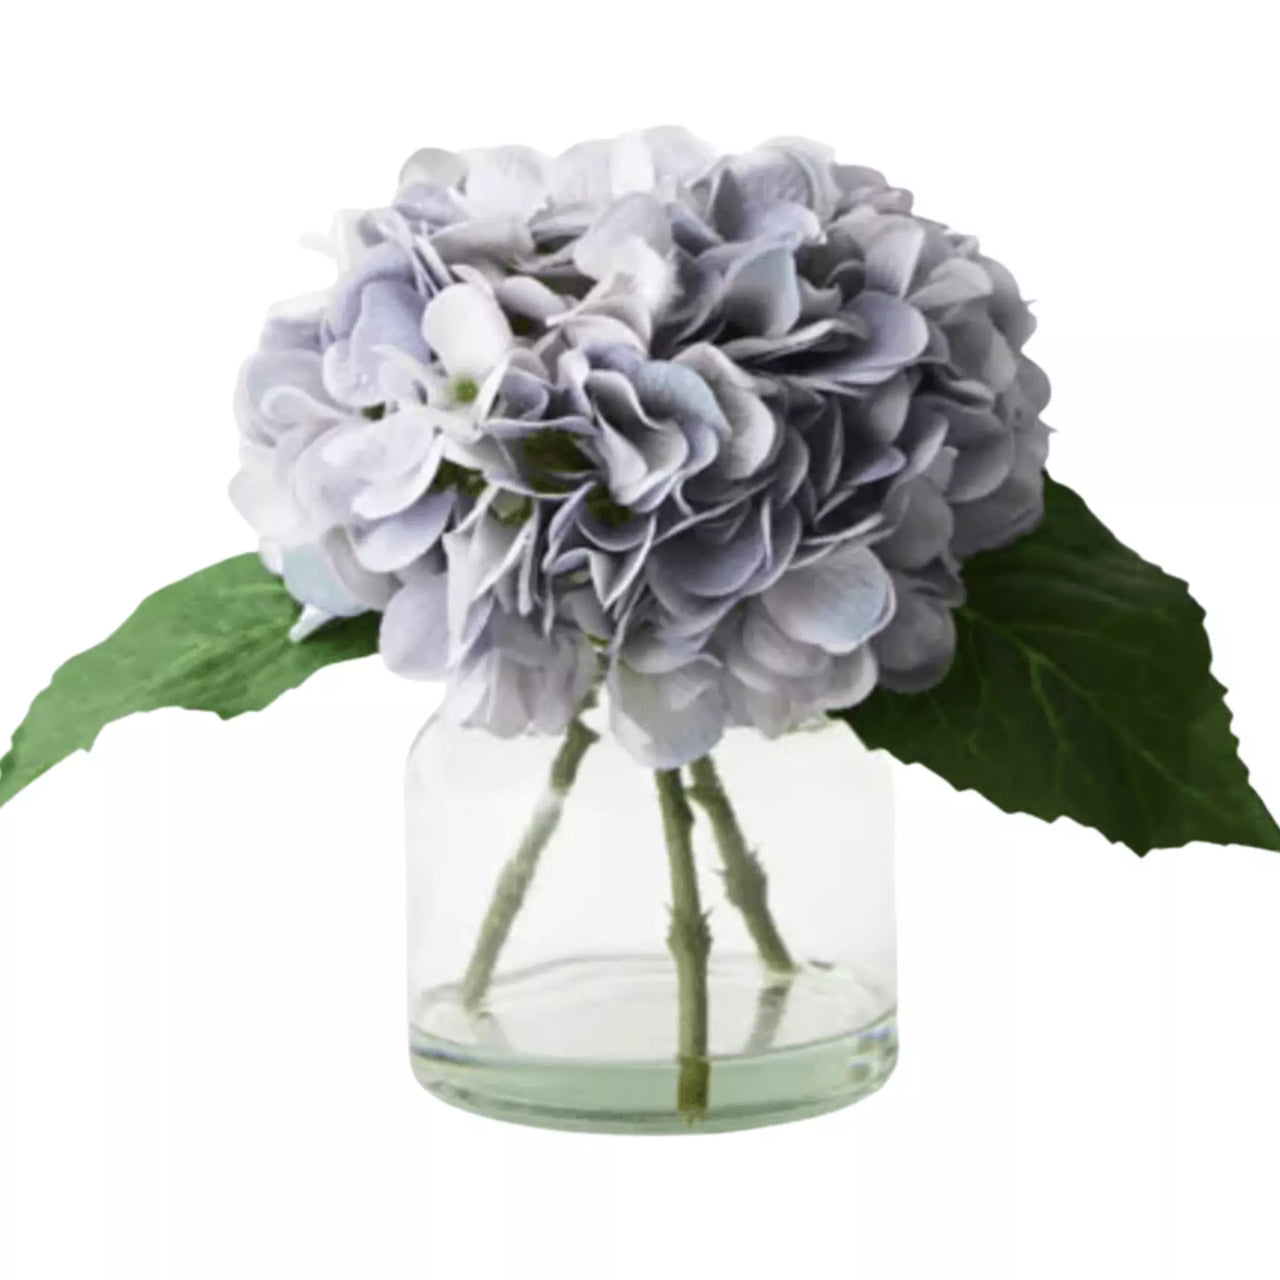 Floral Interiors' Hydrangea in Vase with green leaves.